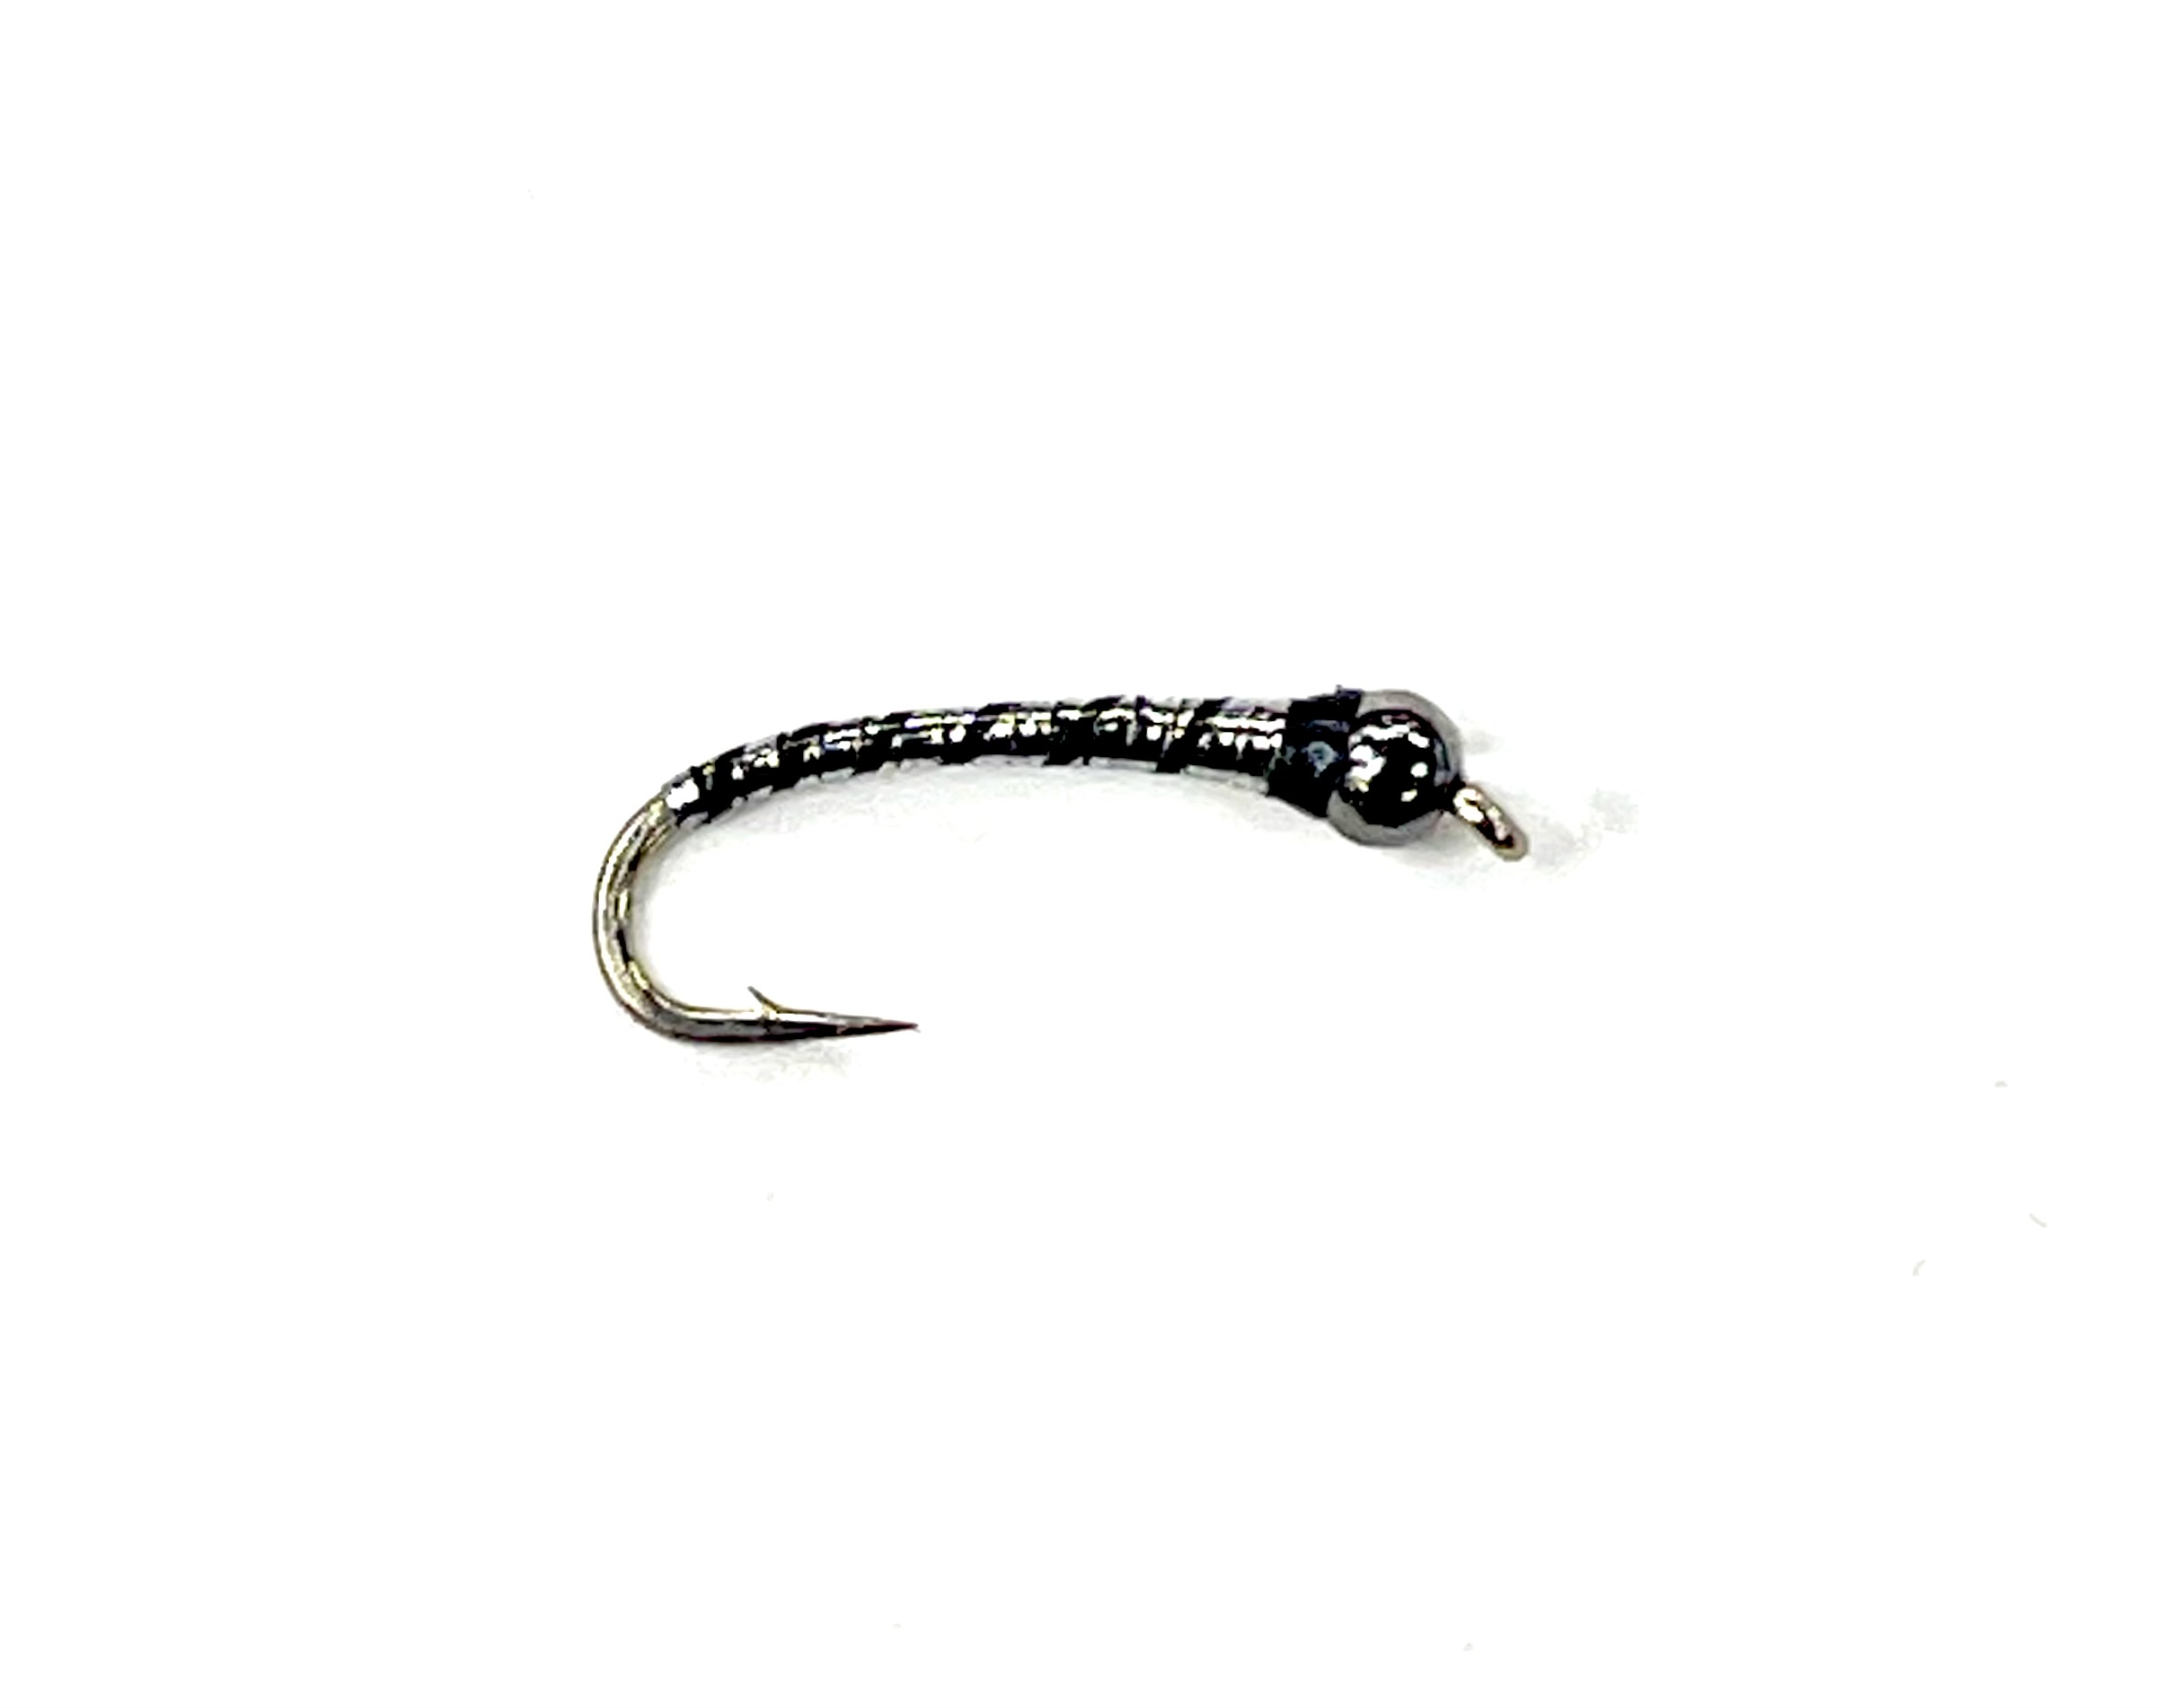 M&Y Static Bag Chironomid - Size 12